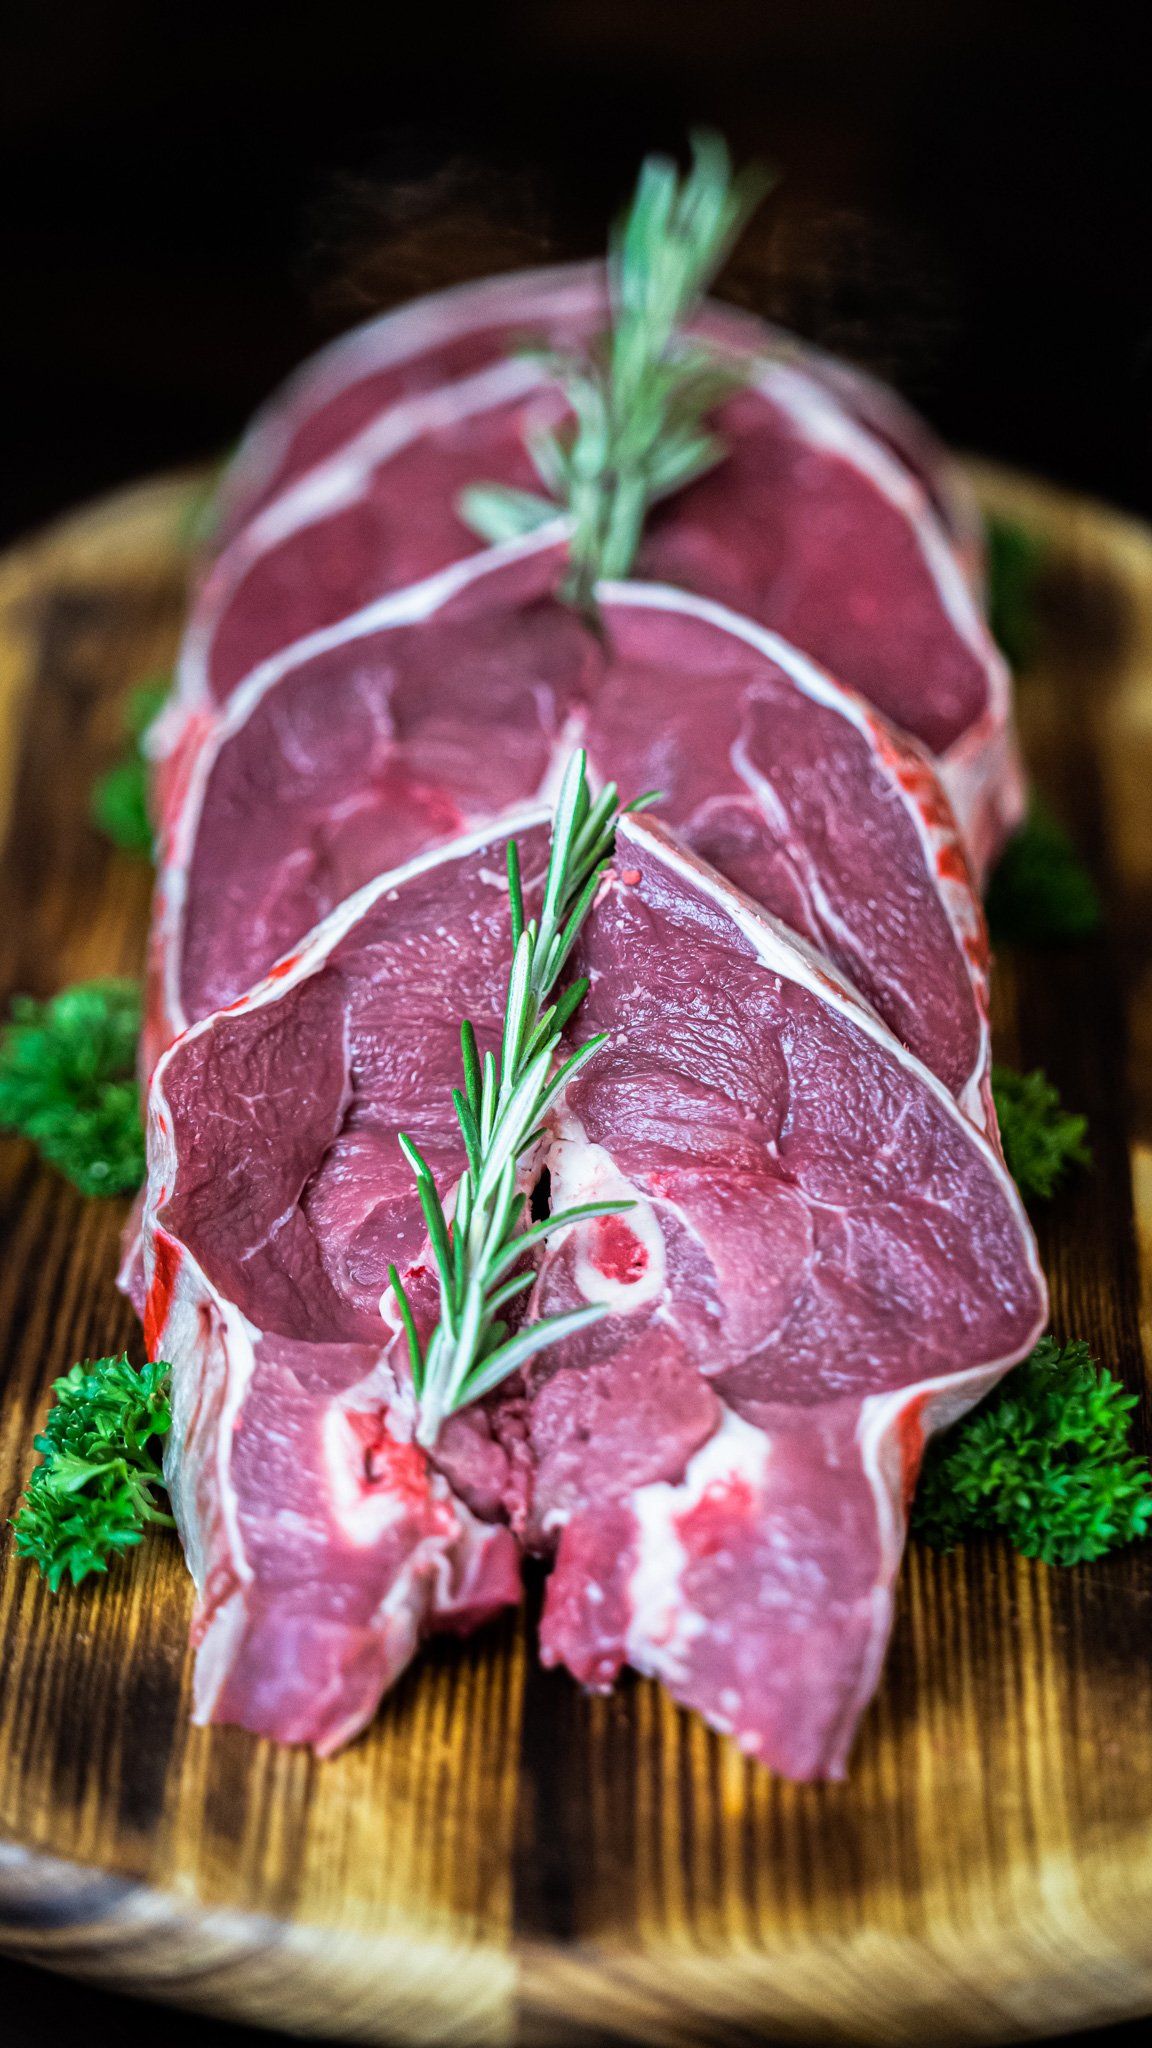 Raw lamb chops on a wooden cutting board with rosemary and parsley.